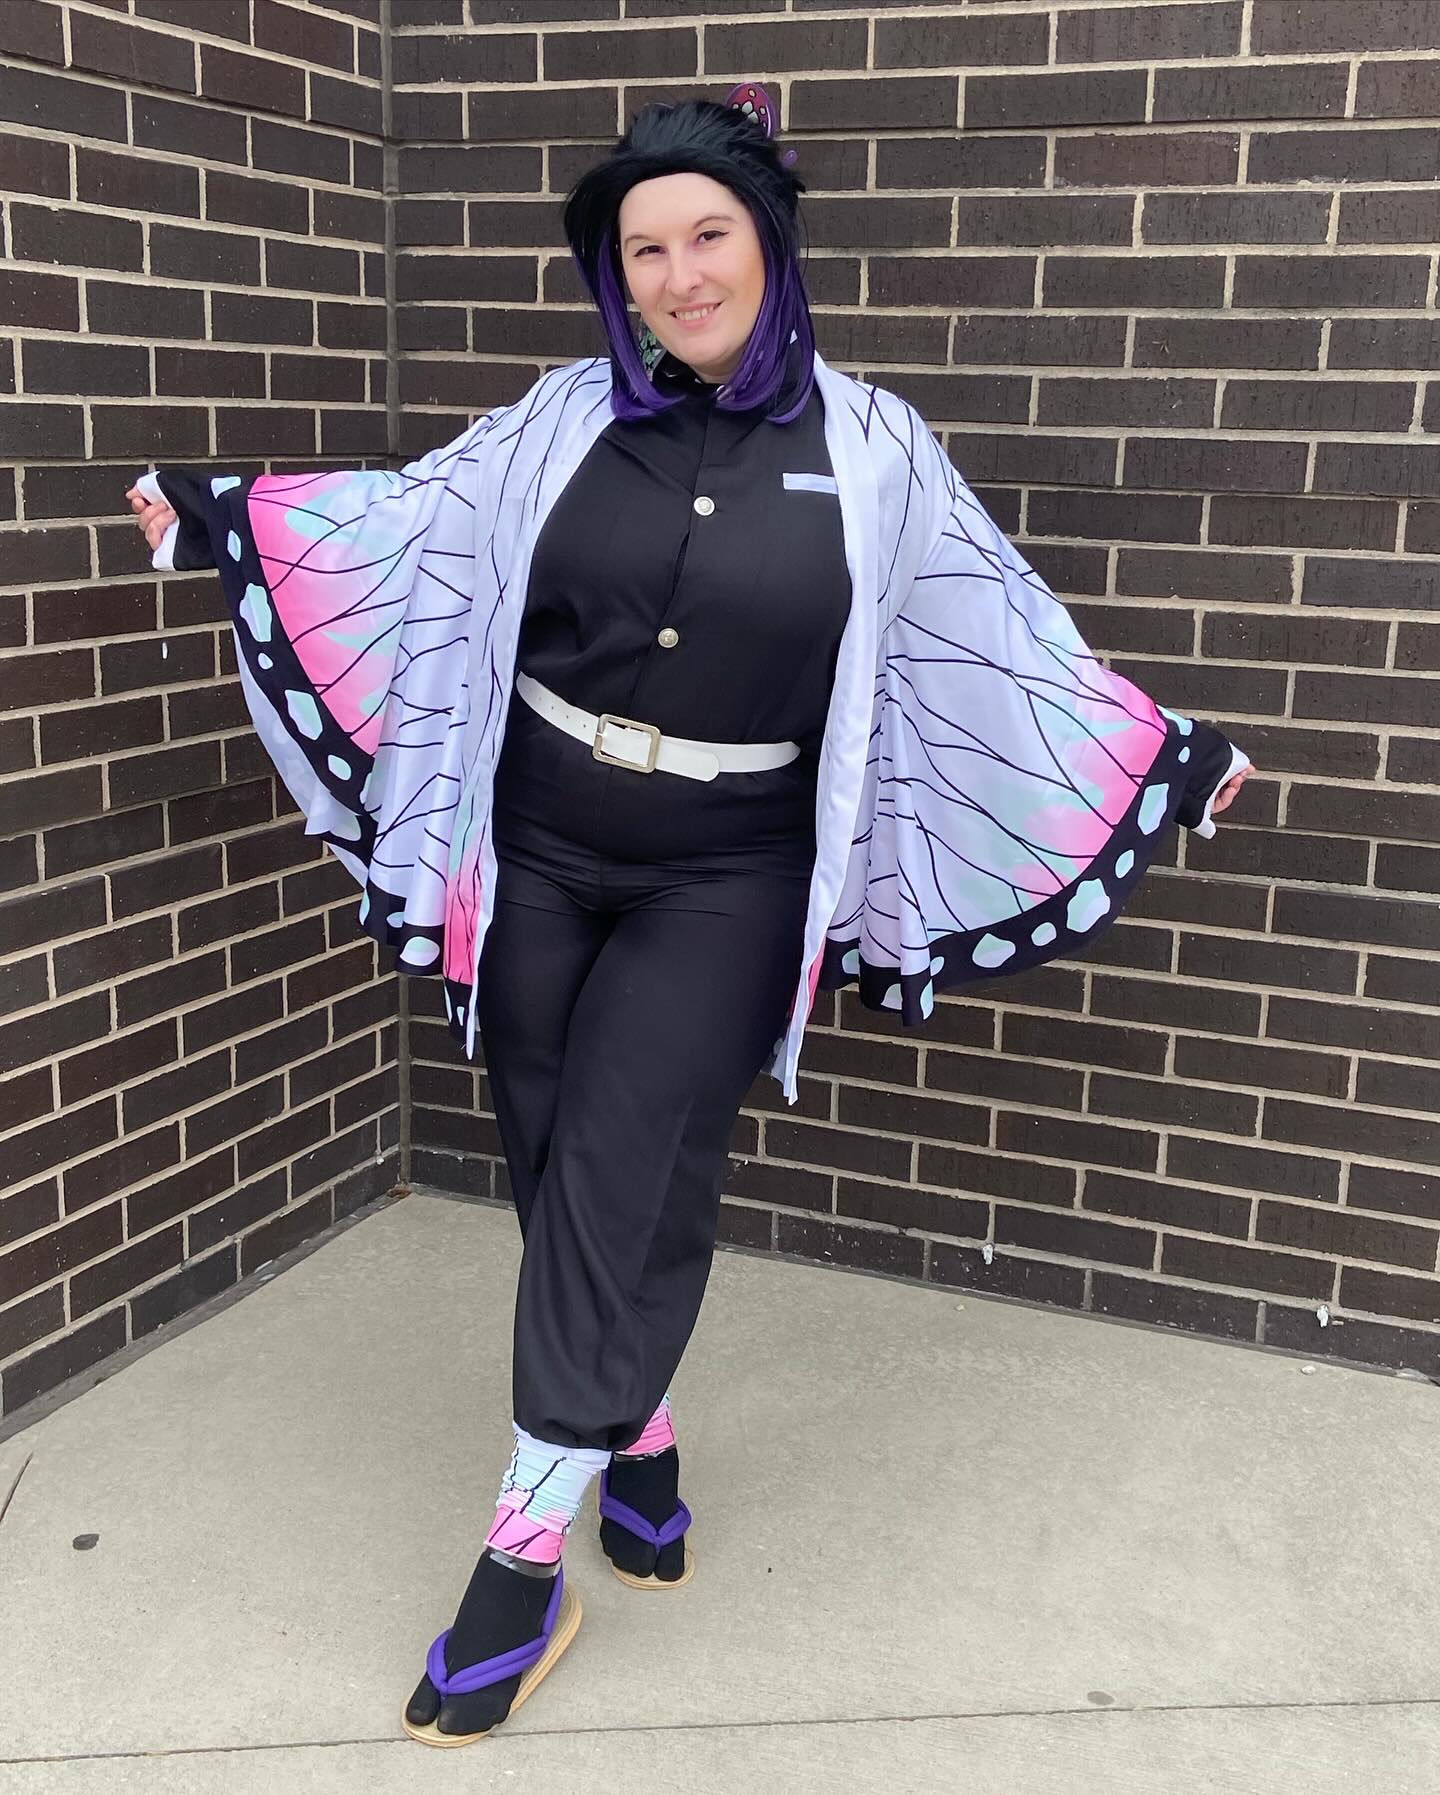 Spread your wings and fly 🦋✨
Thanks to @a_s_h_d_a_w_n for taking that cute pics at @mississippianimefestival a couple weeks ago. It was such a great time and I got to meet @withakinsta in my Shinobu cosplay which was just the greatest experience. She is genuinely one of the nicest people I’ve ever met 🖤
.
.
#cosplay #cosplaygirl #cosplaying #cosplayphoto #cosplayer #cosplayerofinstagram #demonslayer #demonslayerkimetsunoyaiba #kny #demonslayercosplay #shinobu #shinobukochou